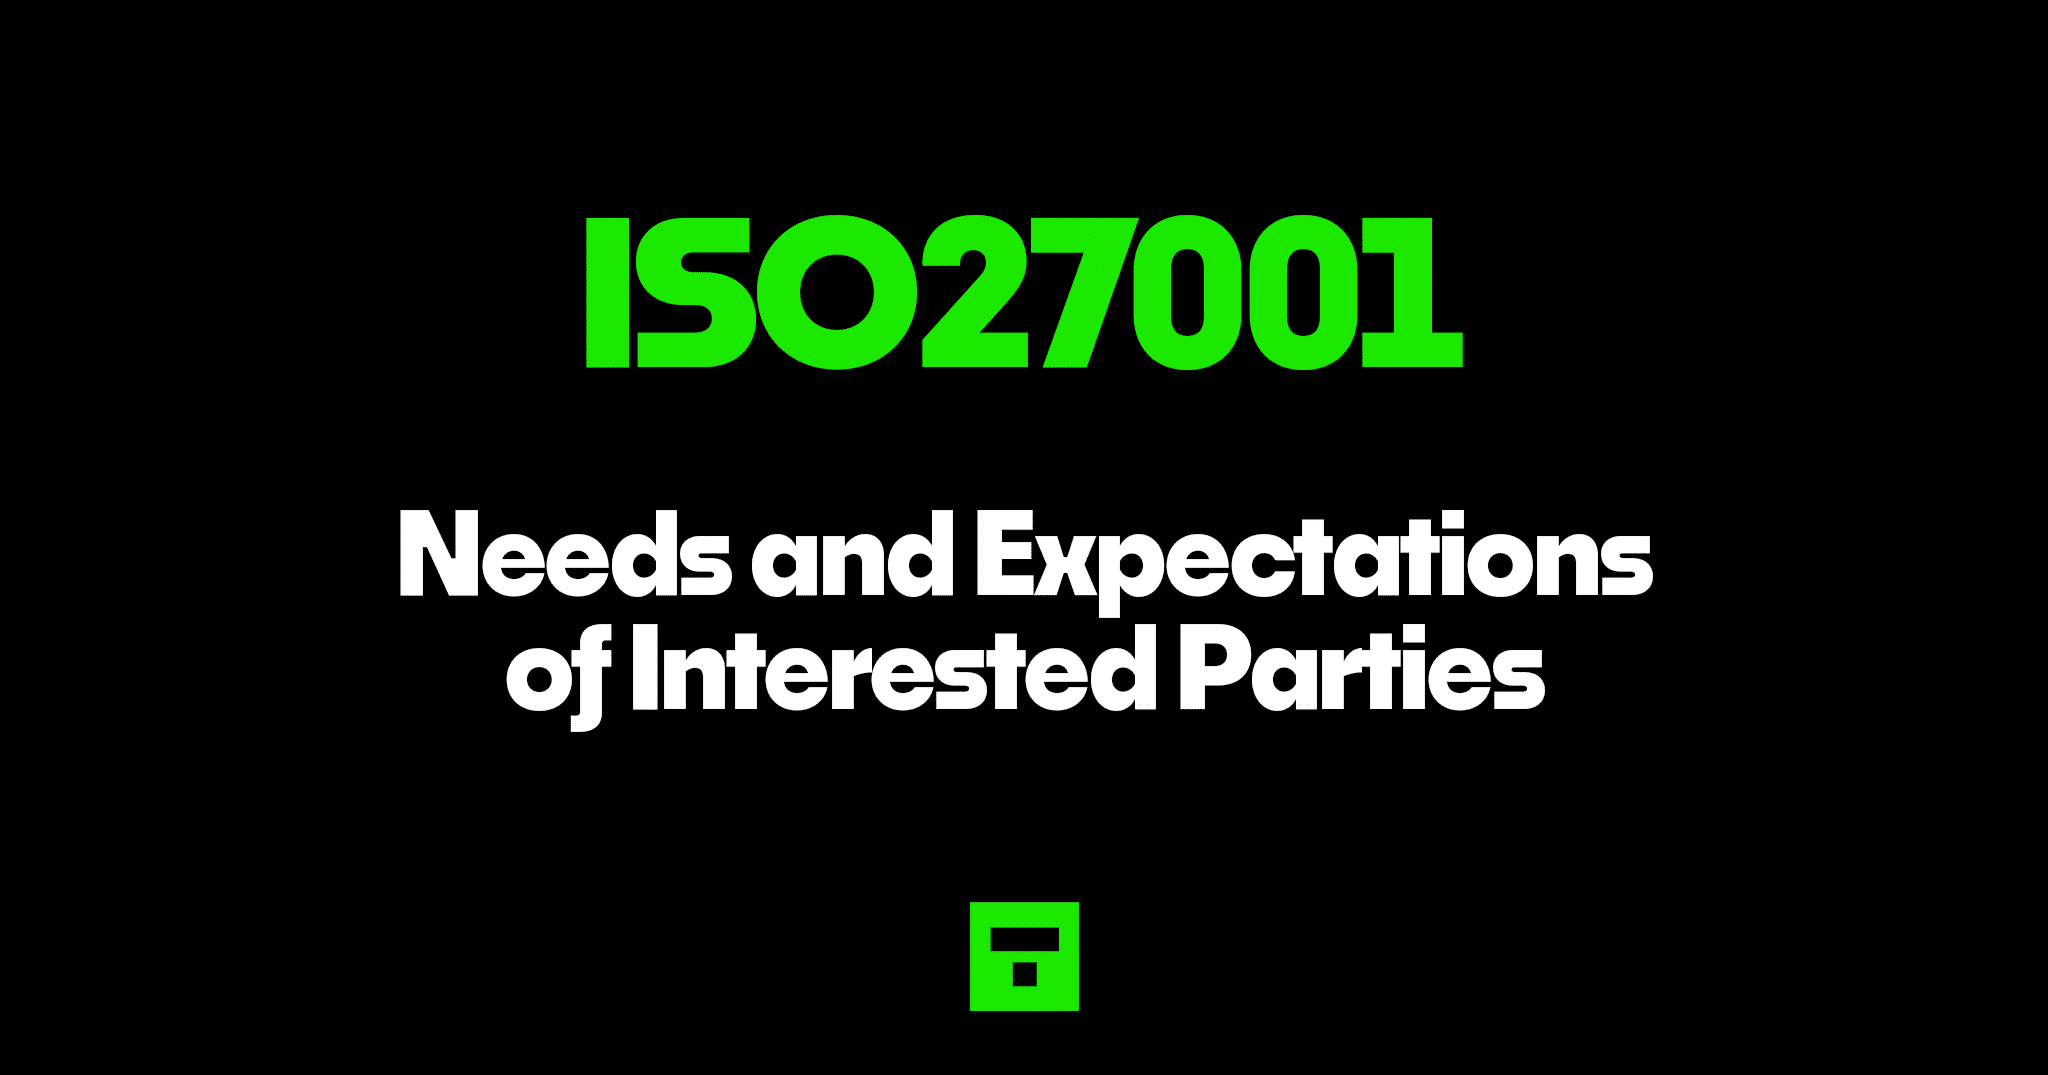 ISO27001 Needs and Expectations of Interested Parties